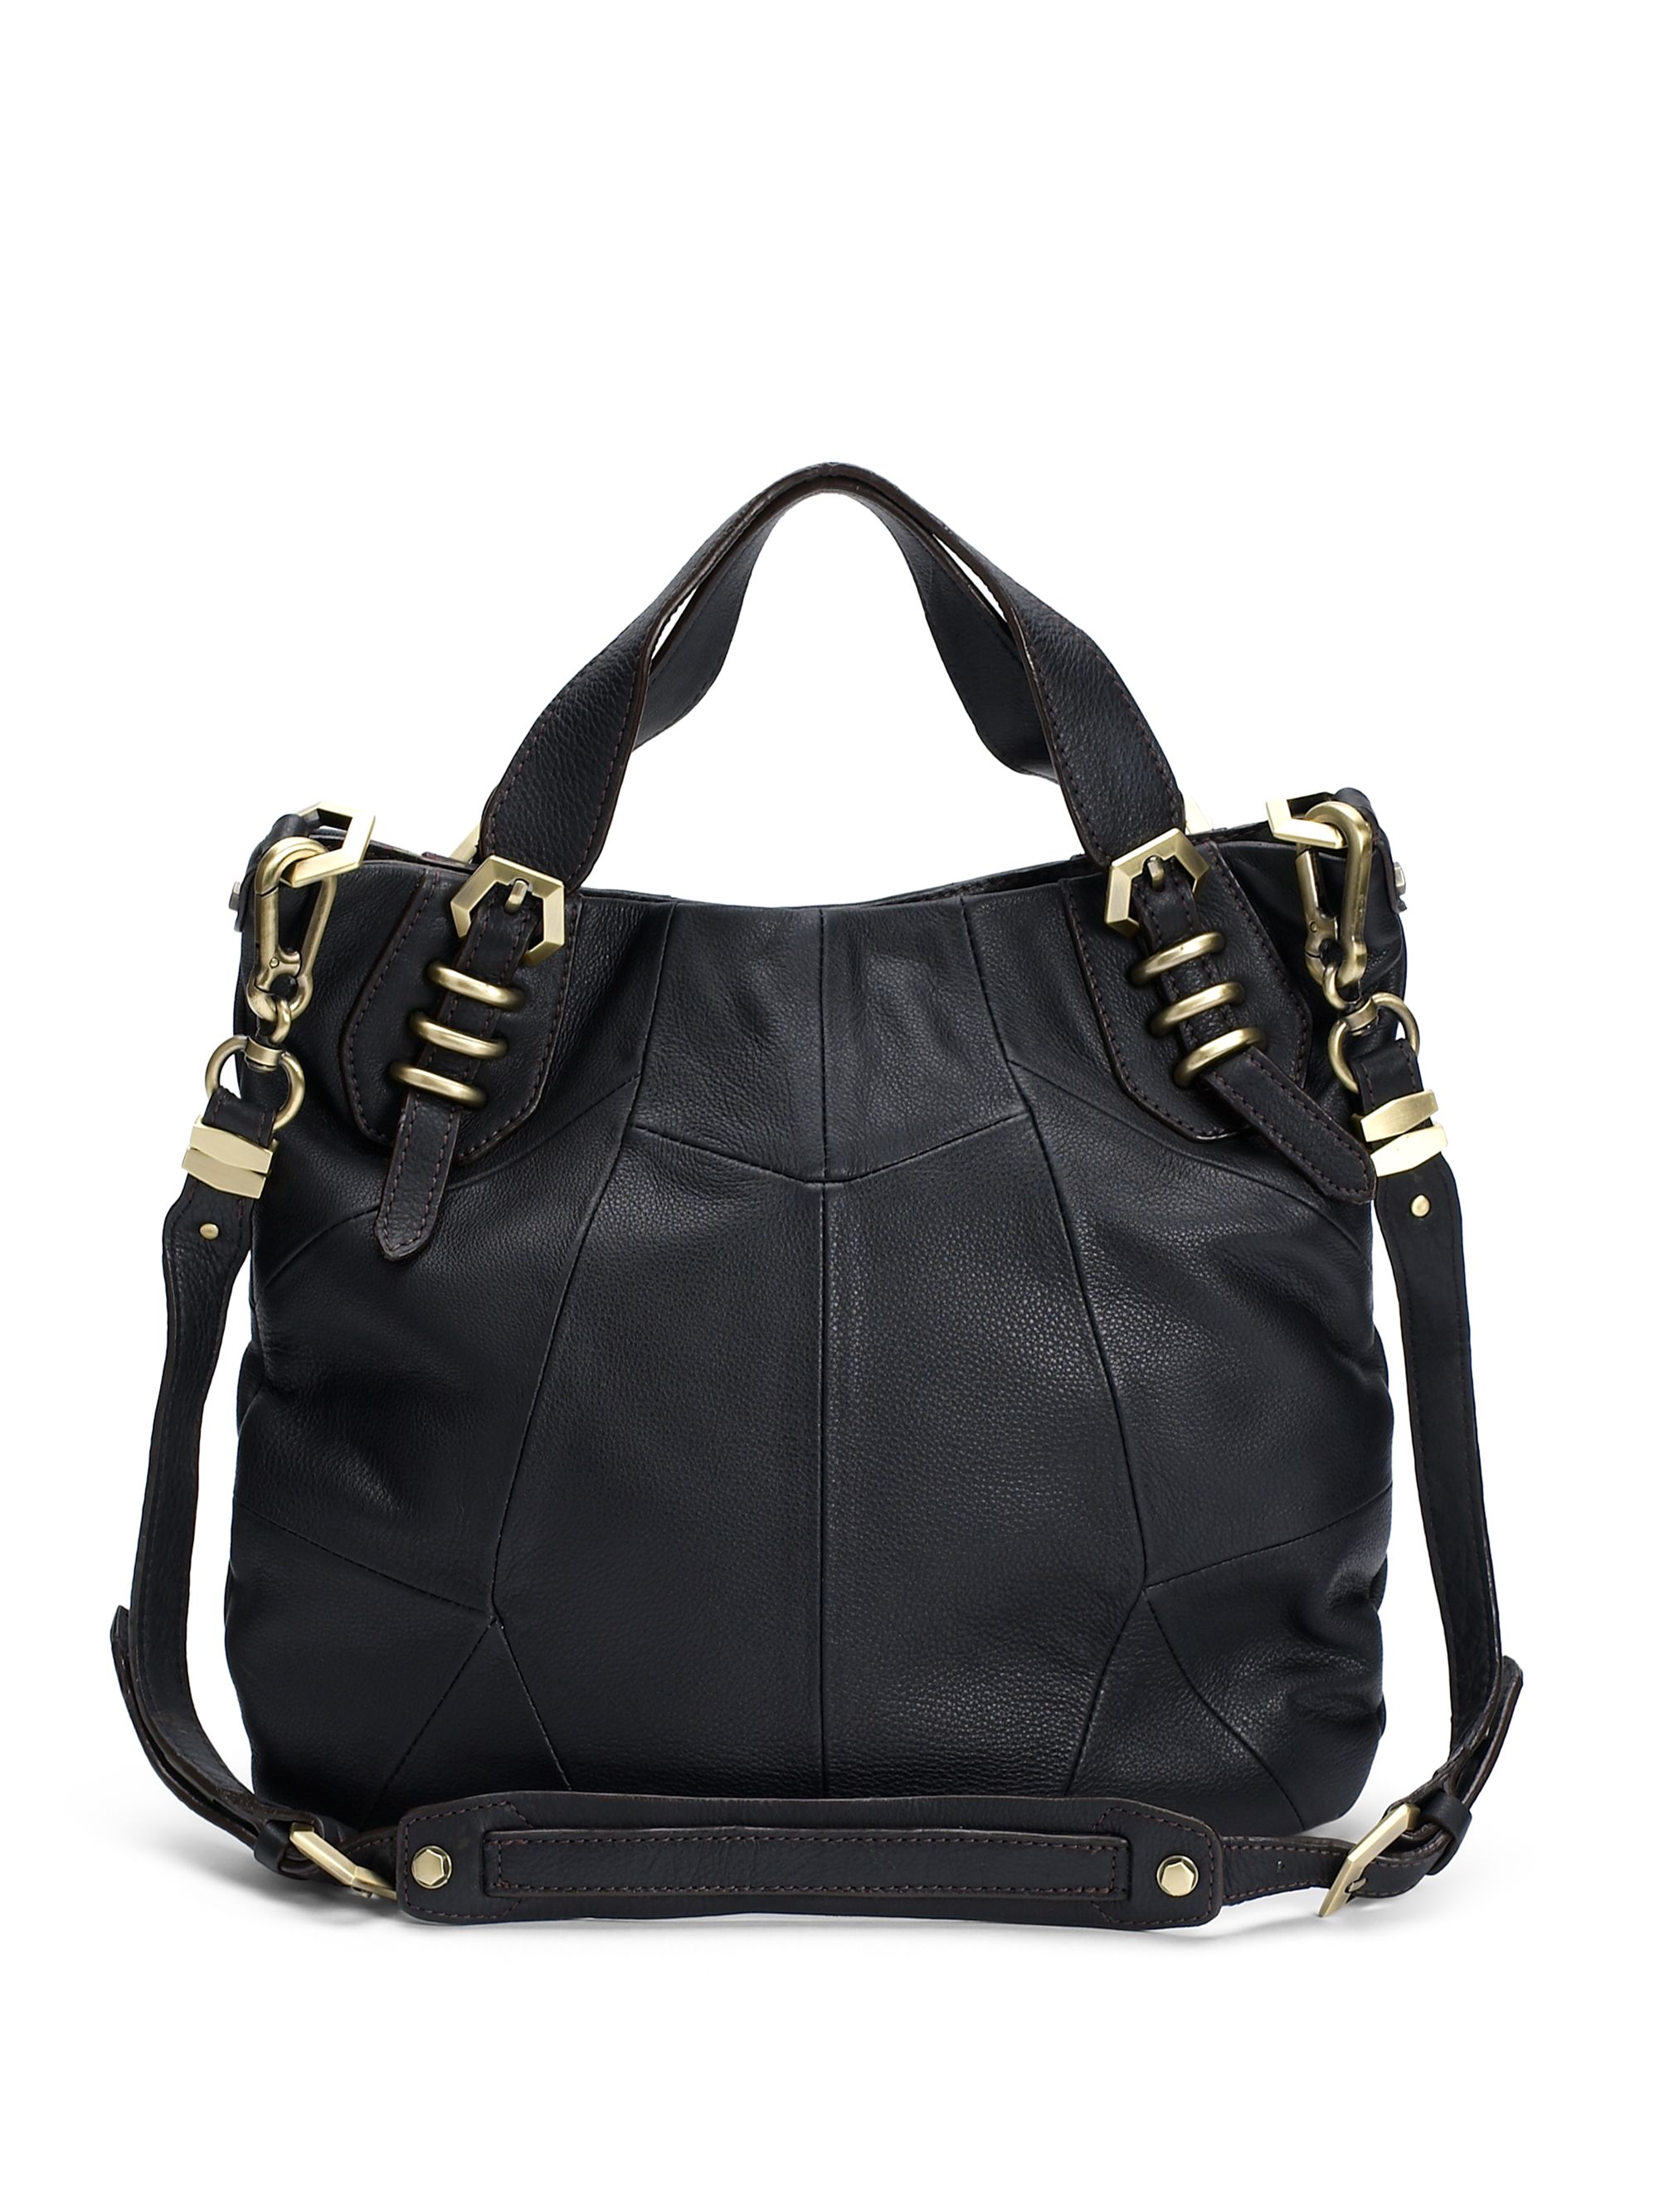 Oryany Convertible Leather Satchel in Black | Lyst